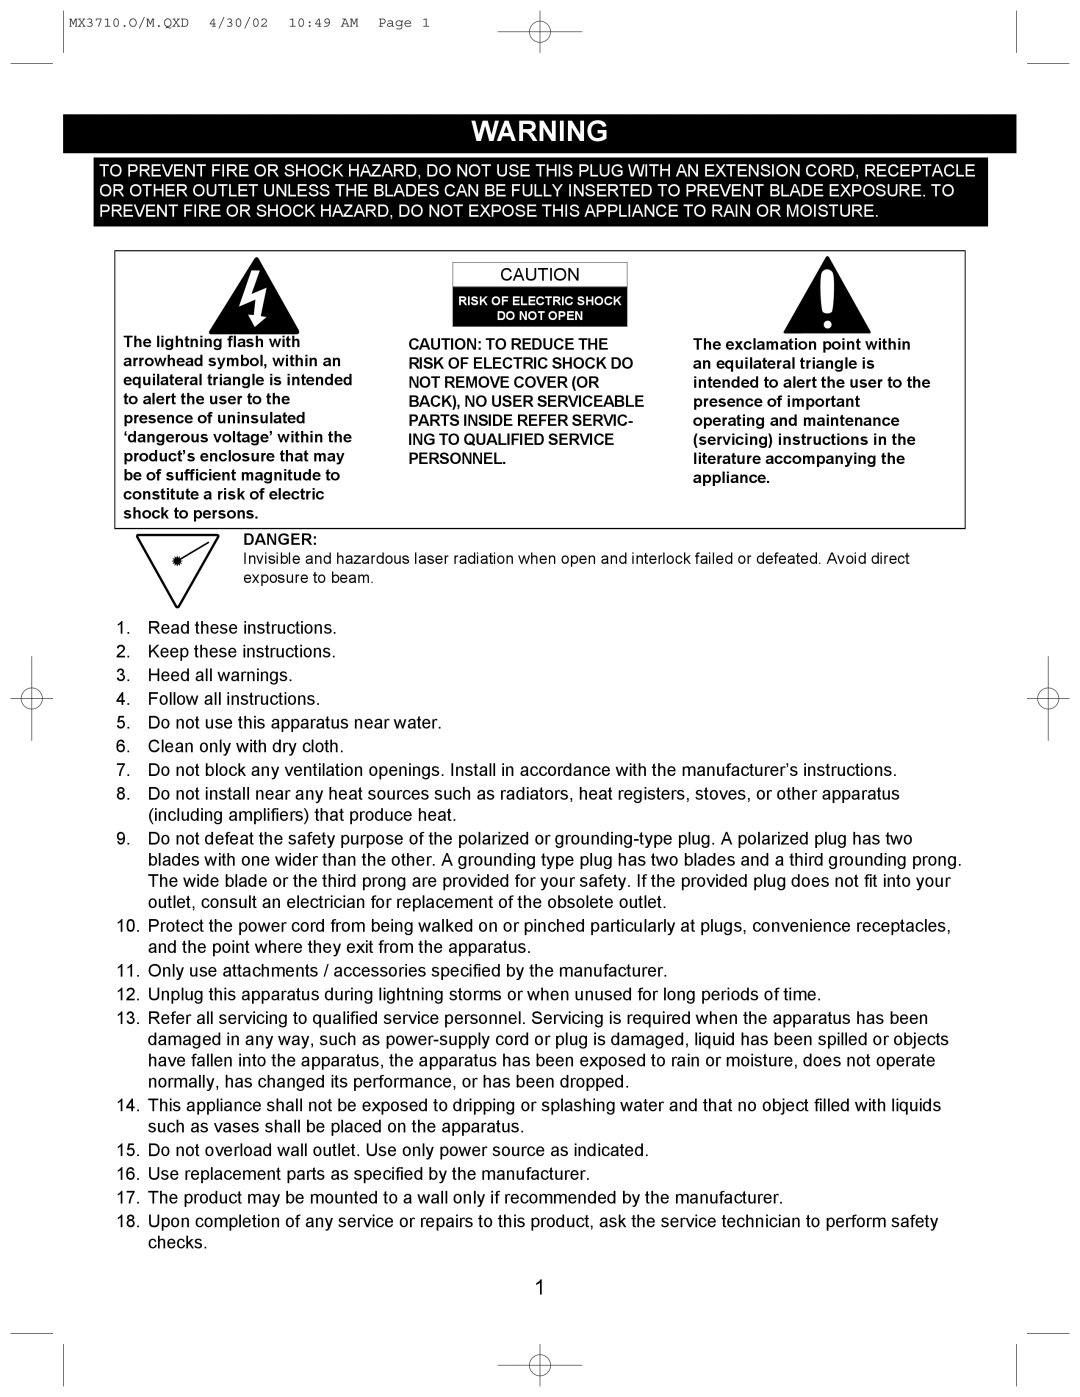 Memorex MX3710 manual Read these instructions 